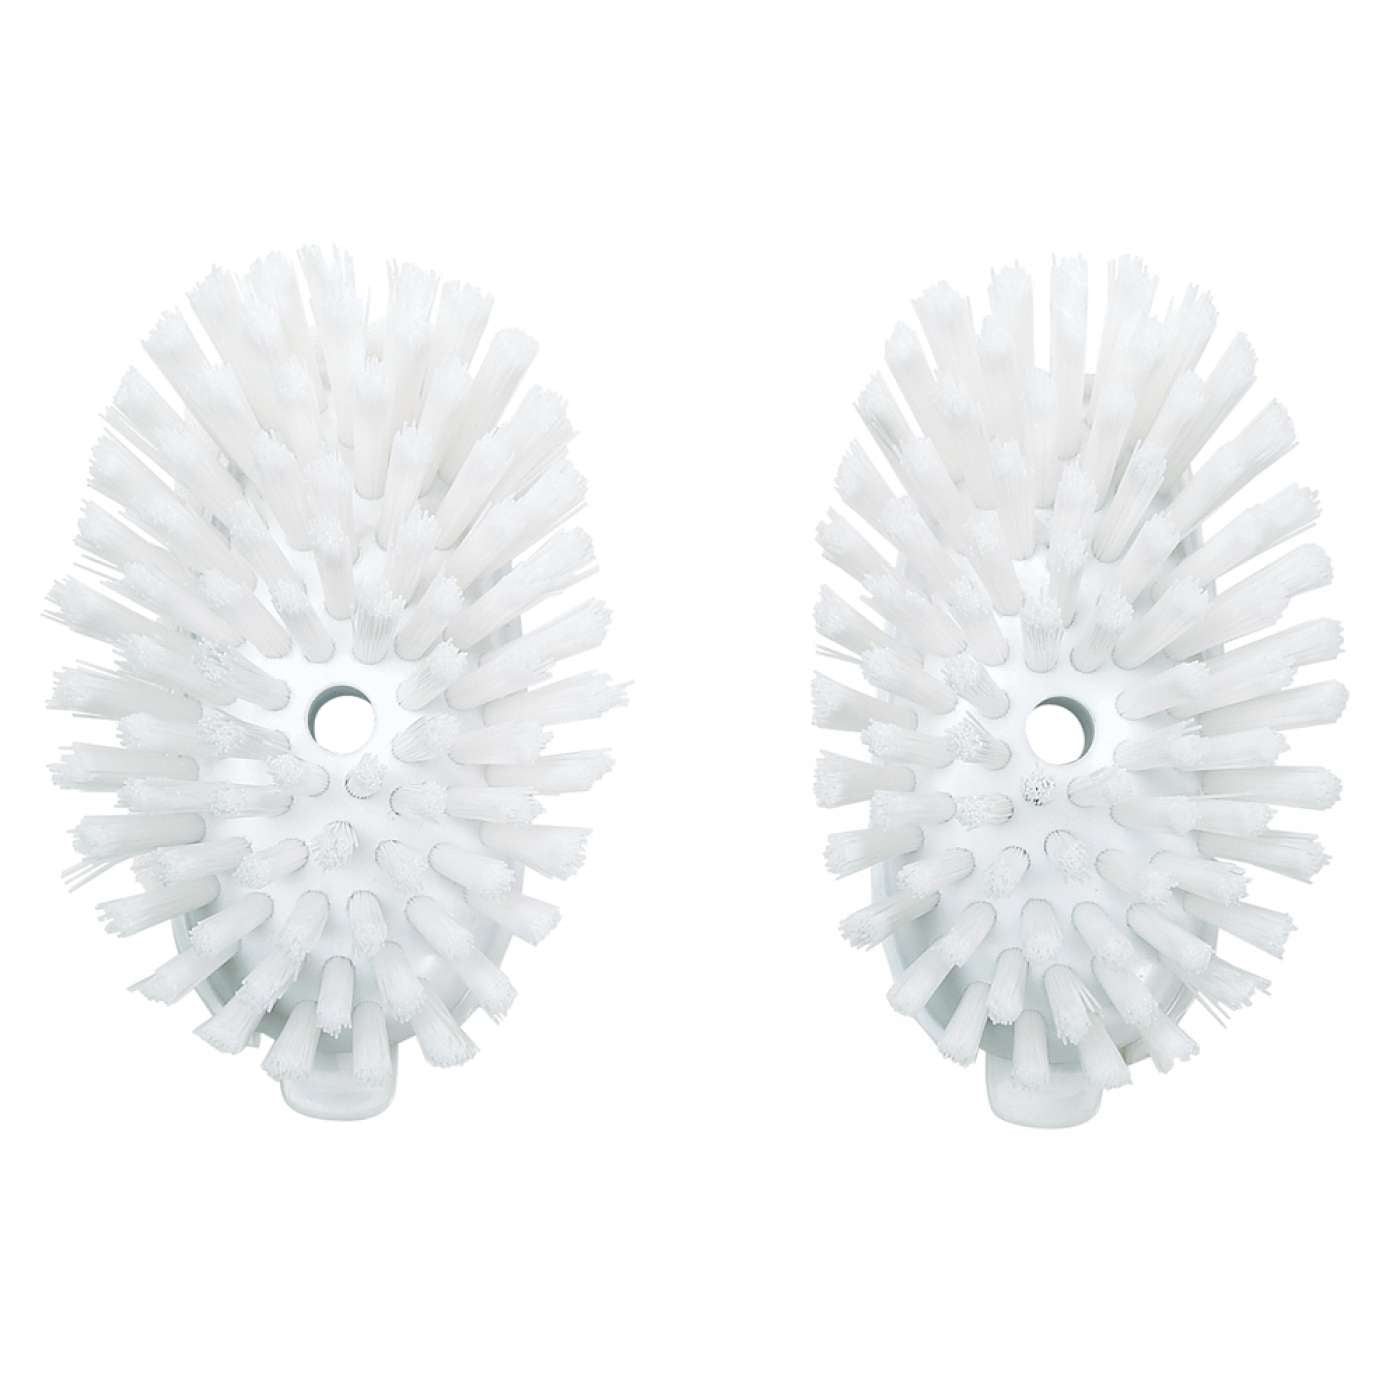 Palm Brush Refills for OXO Good Grips Soap Dispensing Dish Brush - 4 Pack  Cleaning Replacement Brush Head for OXO Palm Brush(White)